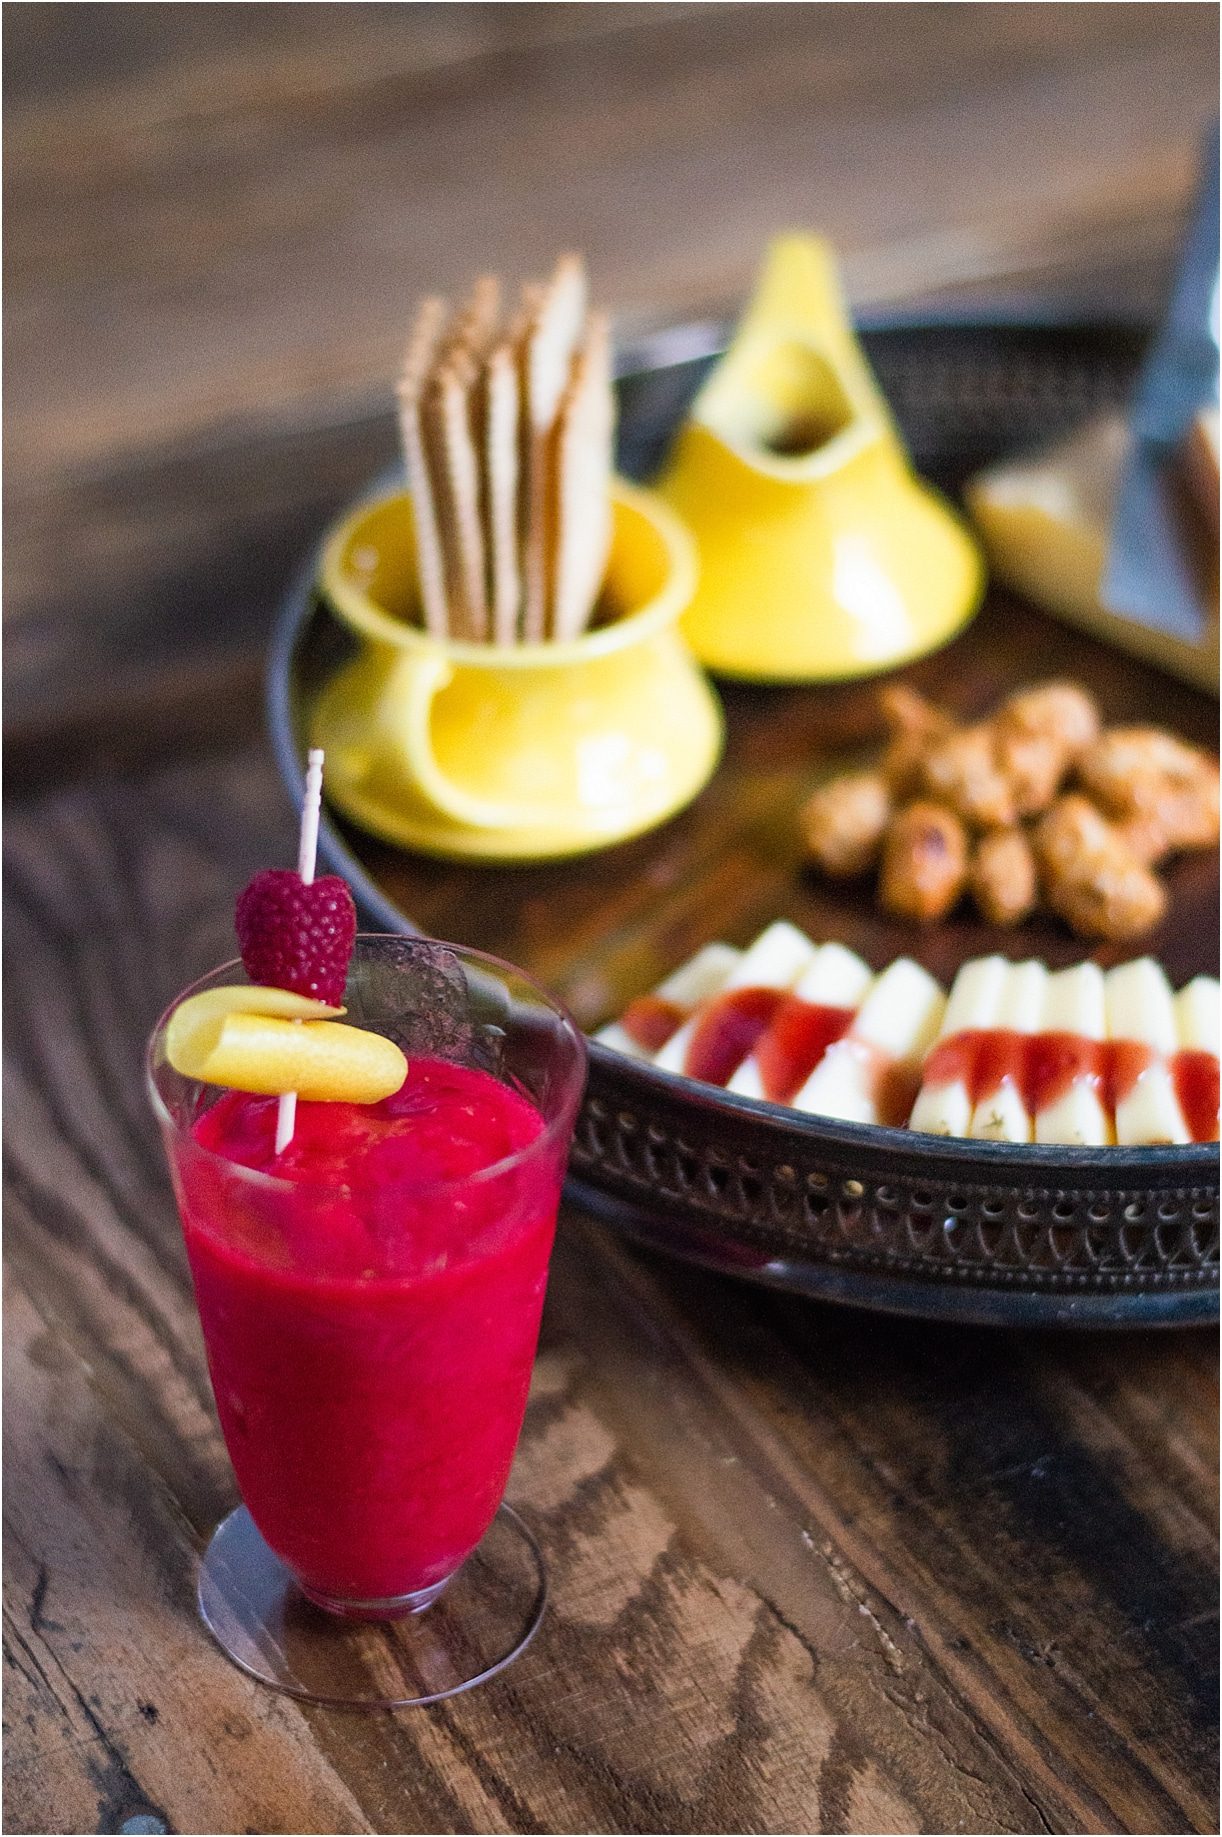 Date Night Ideas Cheese Board Cocktails Recipe Cocktail Drinks | Hill City Bride Virginia Weddings Chocolate Martini Raspberry Lemonade Refresher Spiked Drizzle